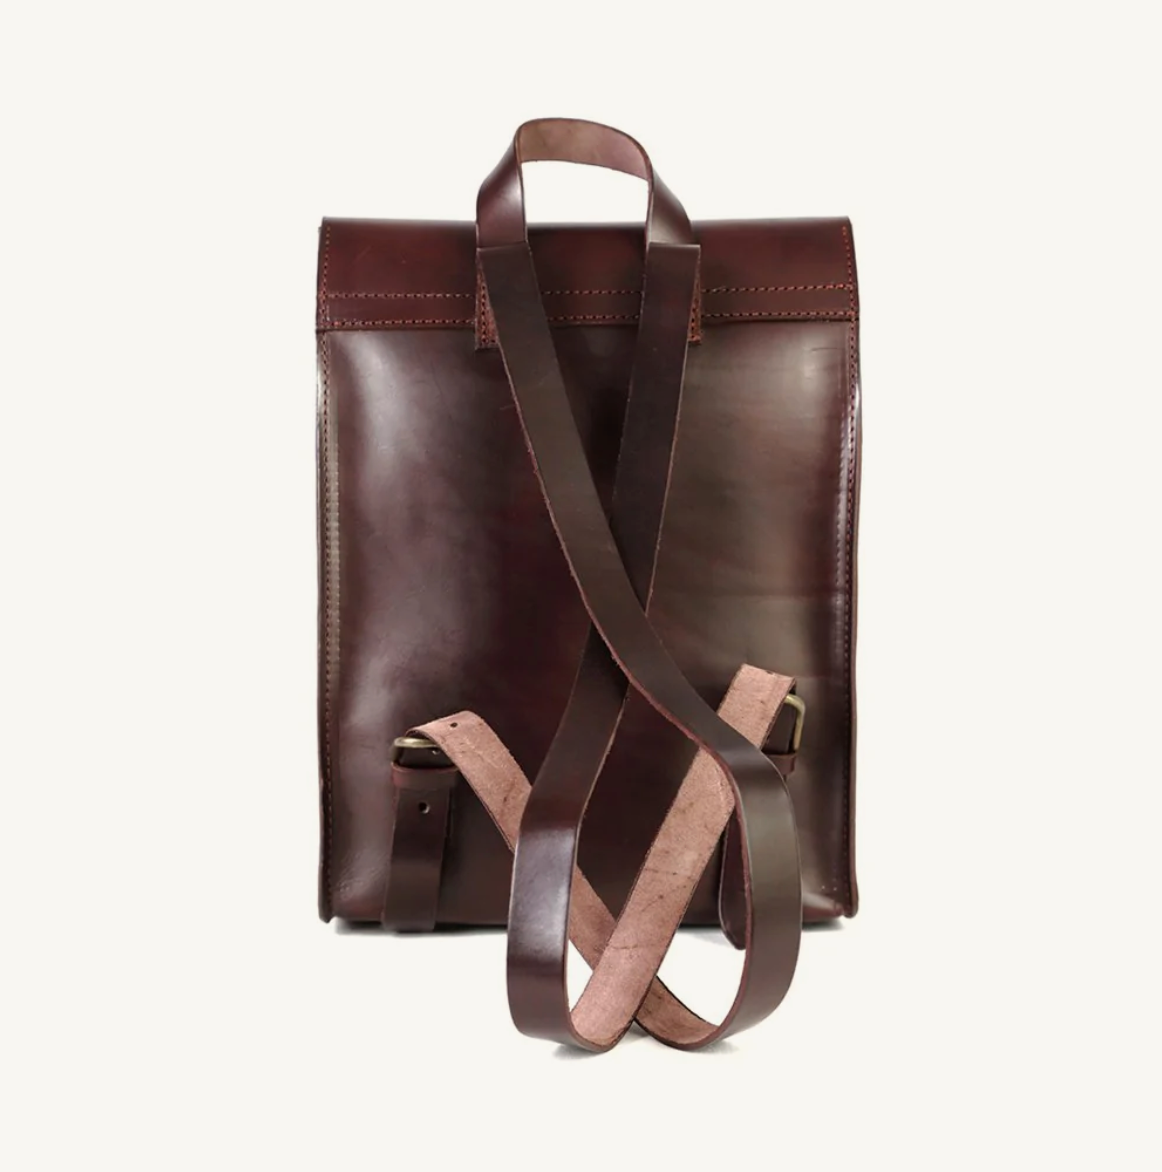 The Dust Company - Artisanal Italian bags for collectors